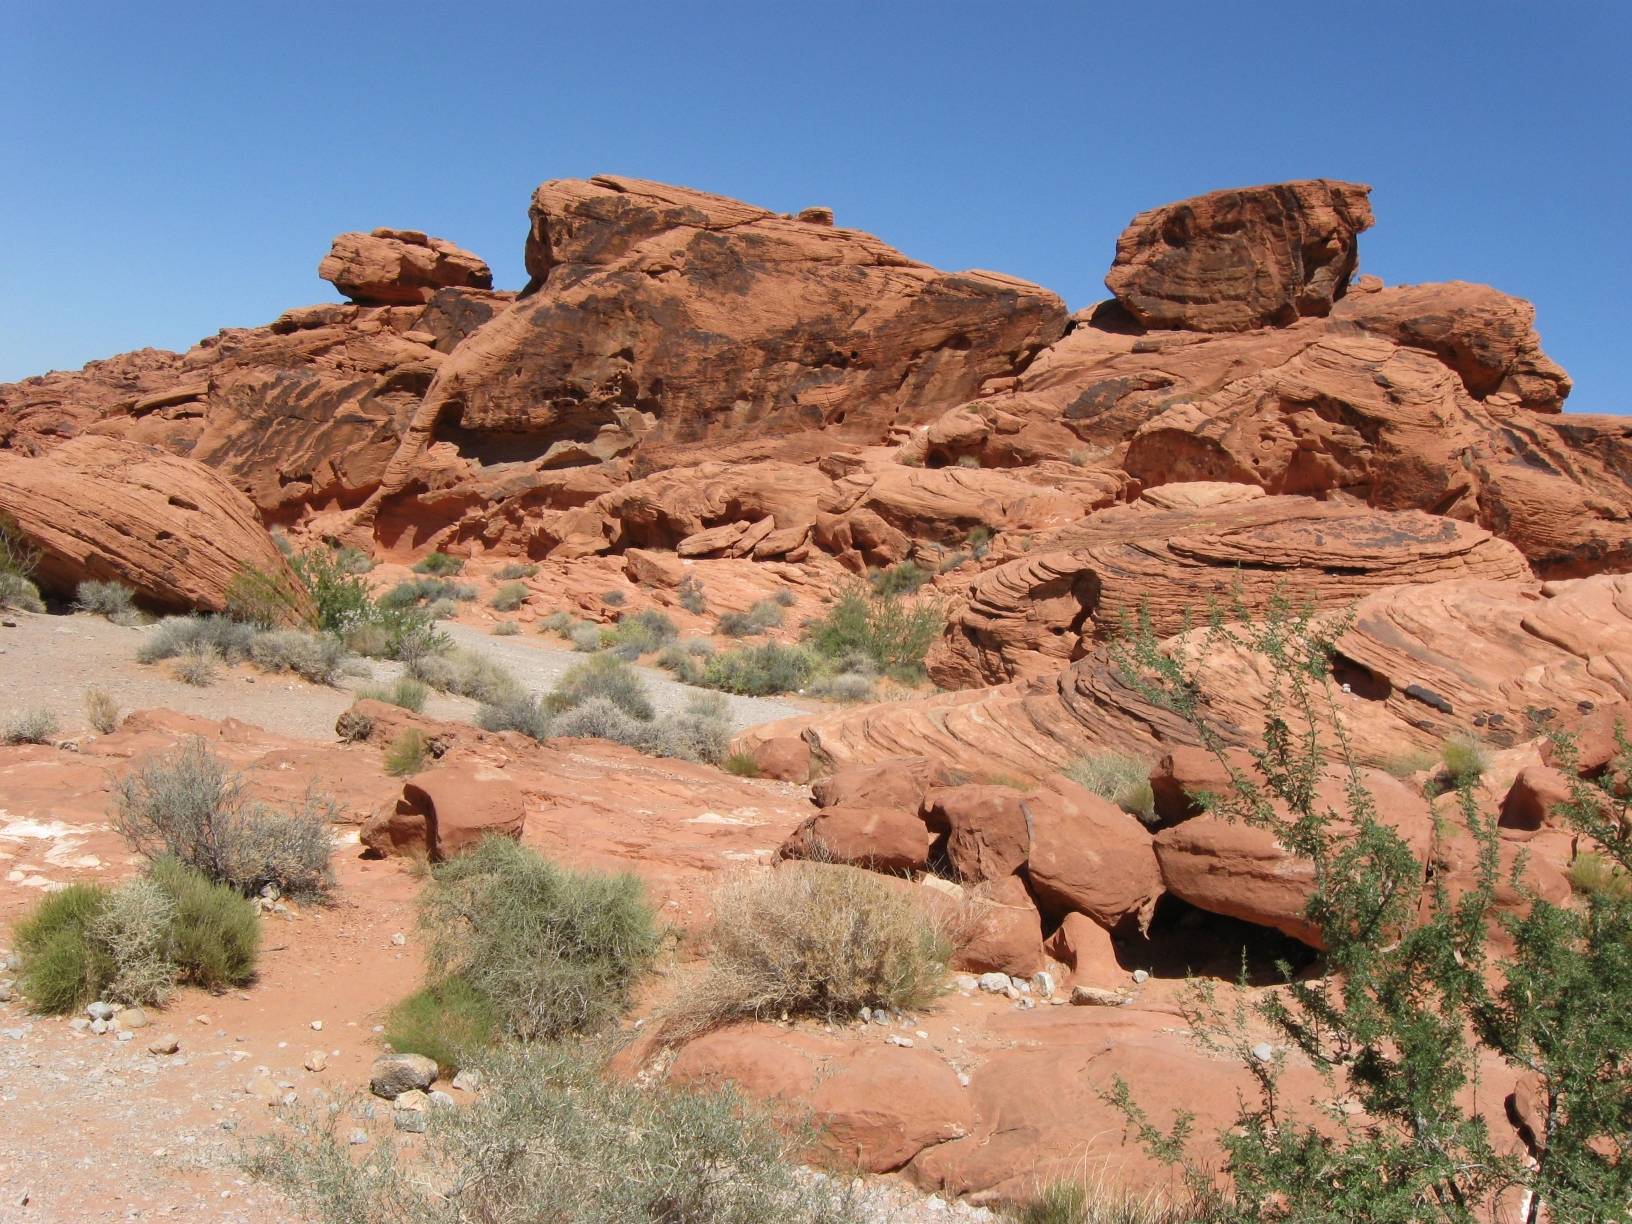 Image: A red sandstone rock formation near the western entrance to the park